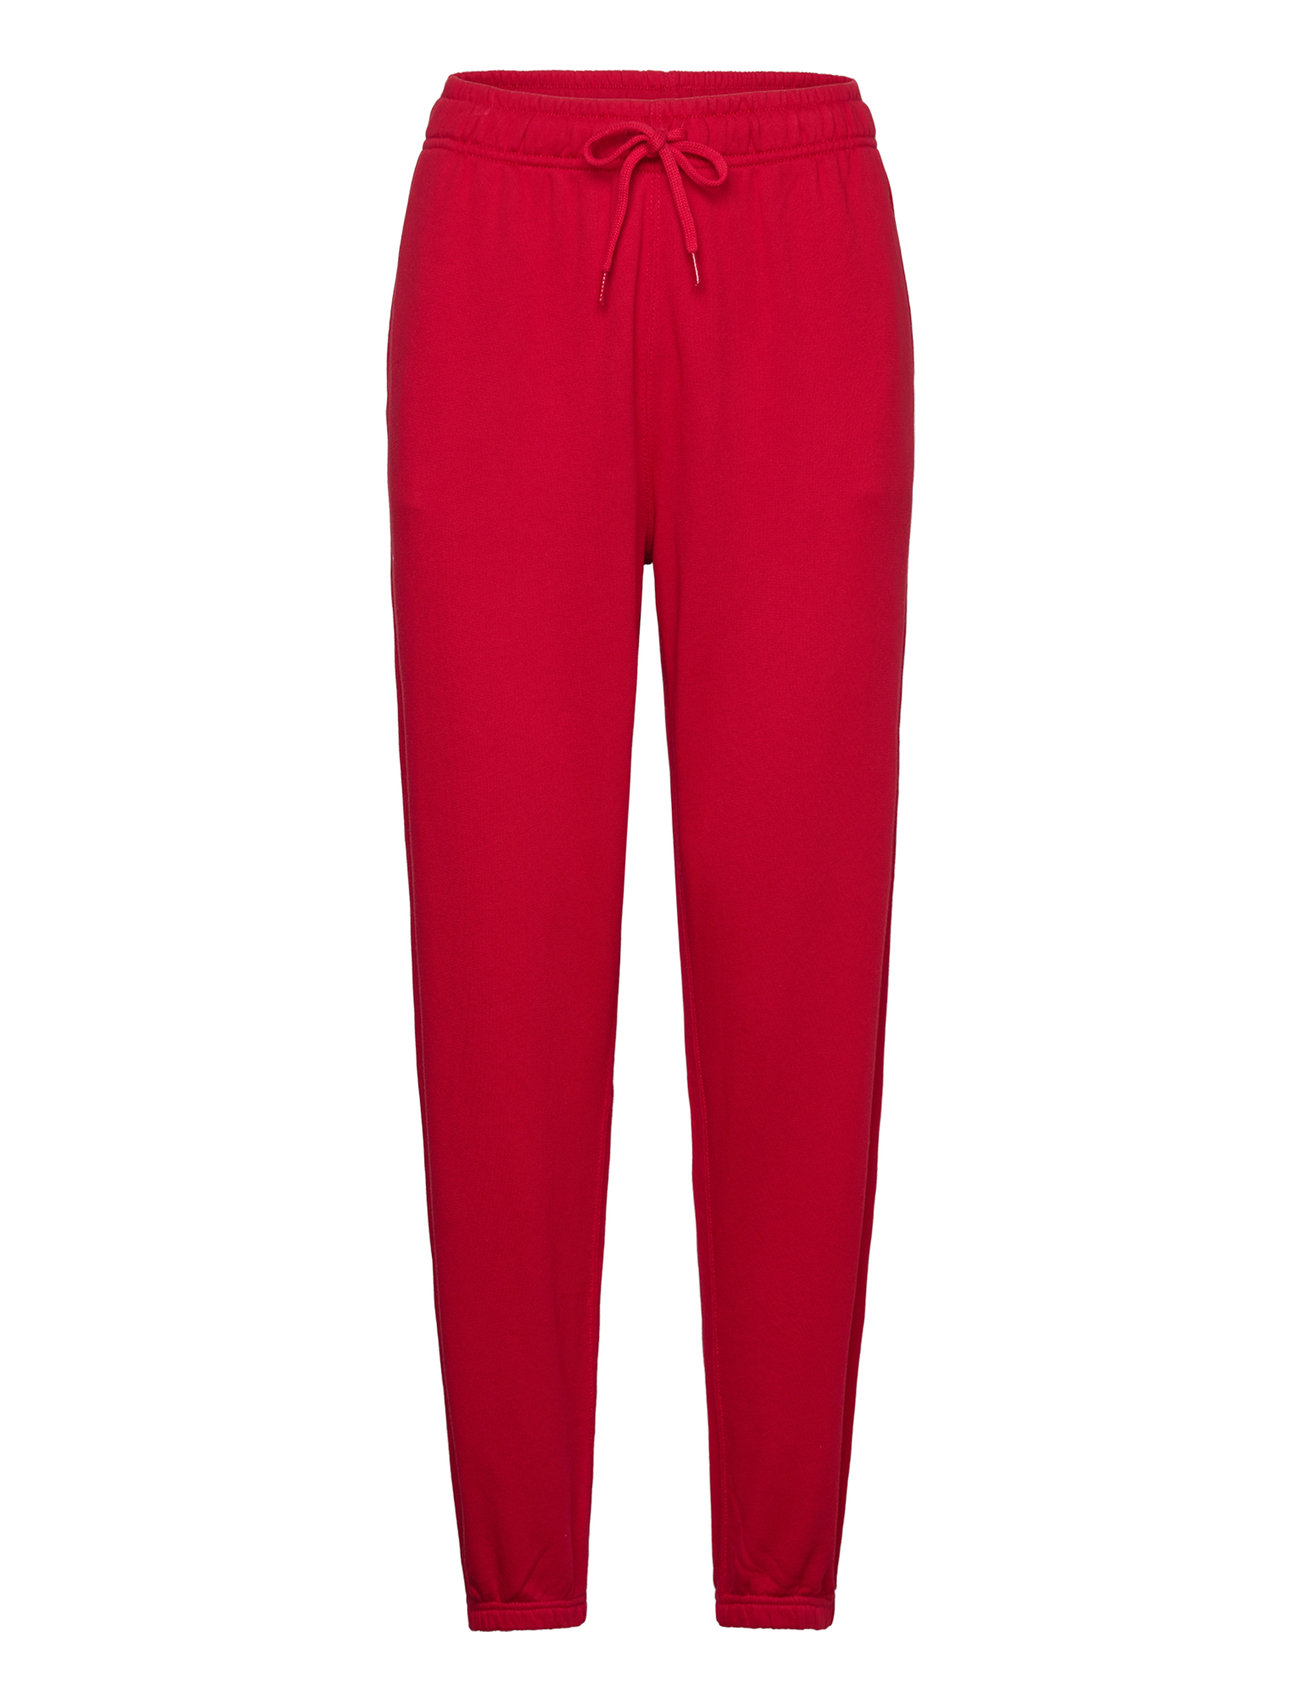 Lunar New Year Terry Sweatpant Bottoms Sweatpants Red Polo Ralph Lauren